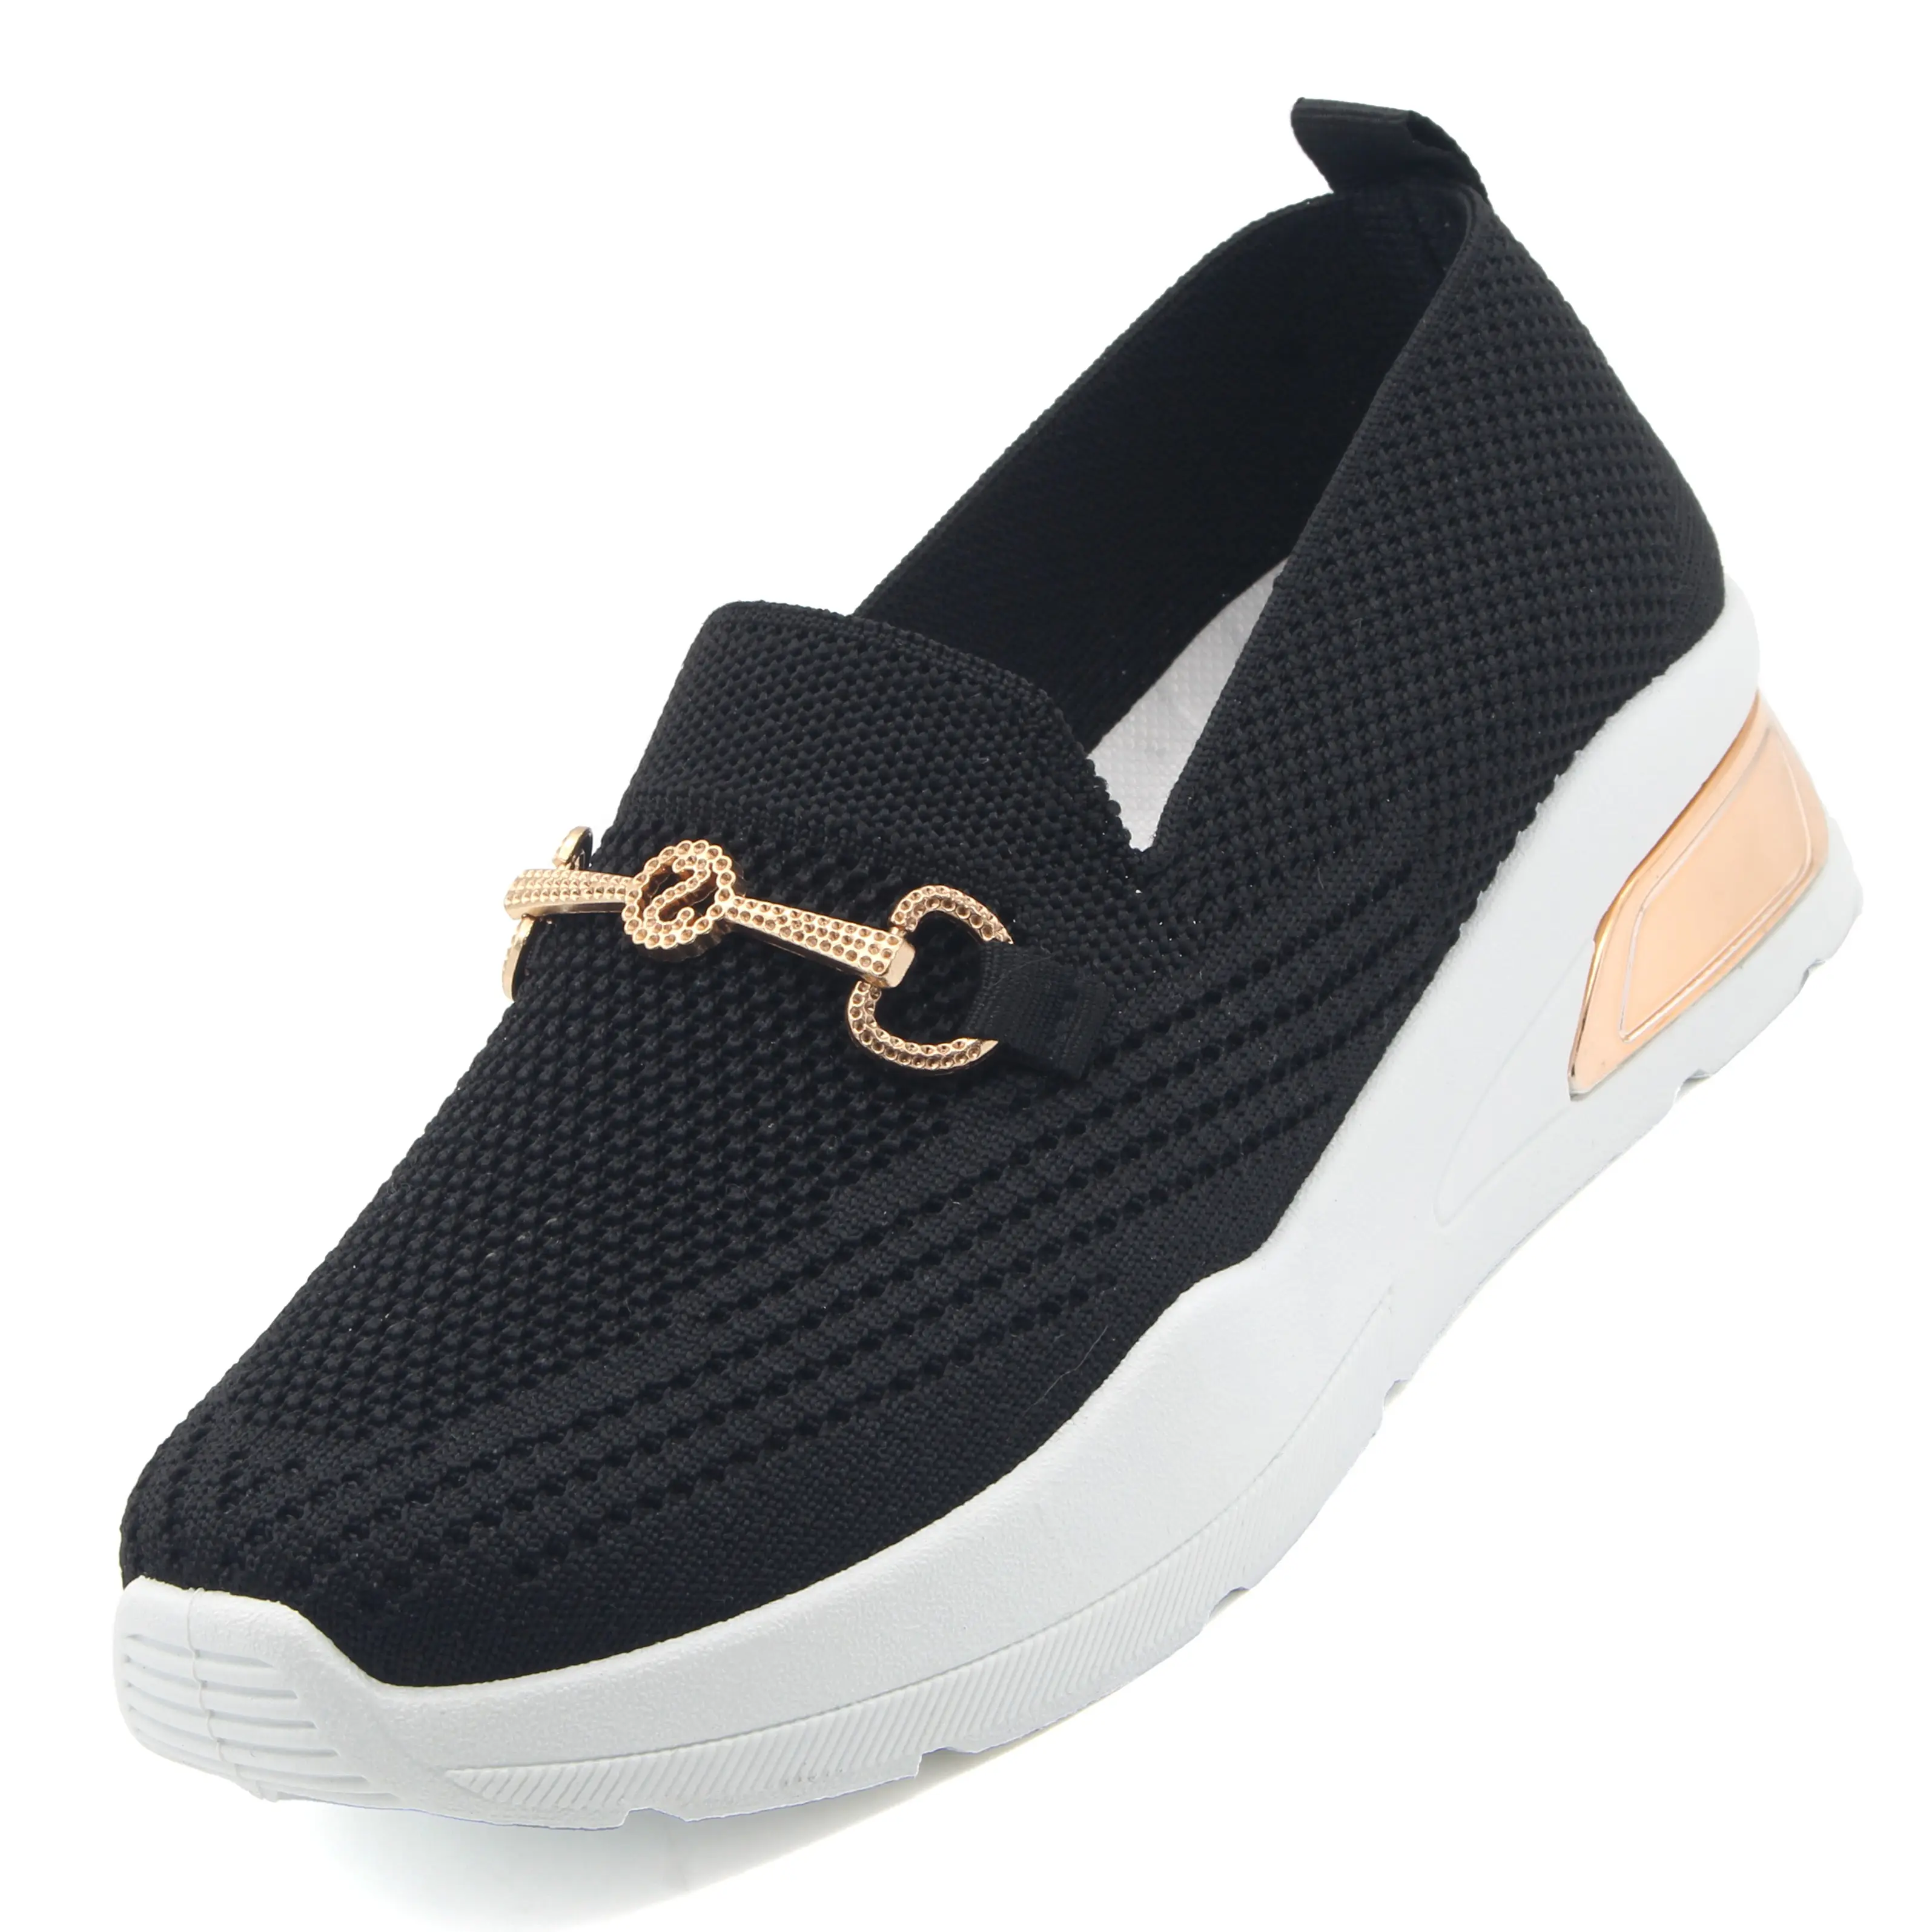 Brand Shoes Soft Flexible Urban Women Shoes Sneakers For Women And Ladies Chaussures Pour Femmes Shoe Sole